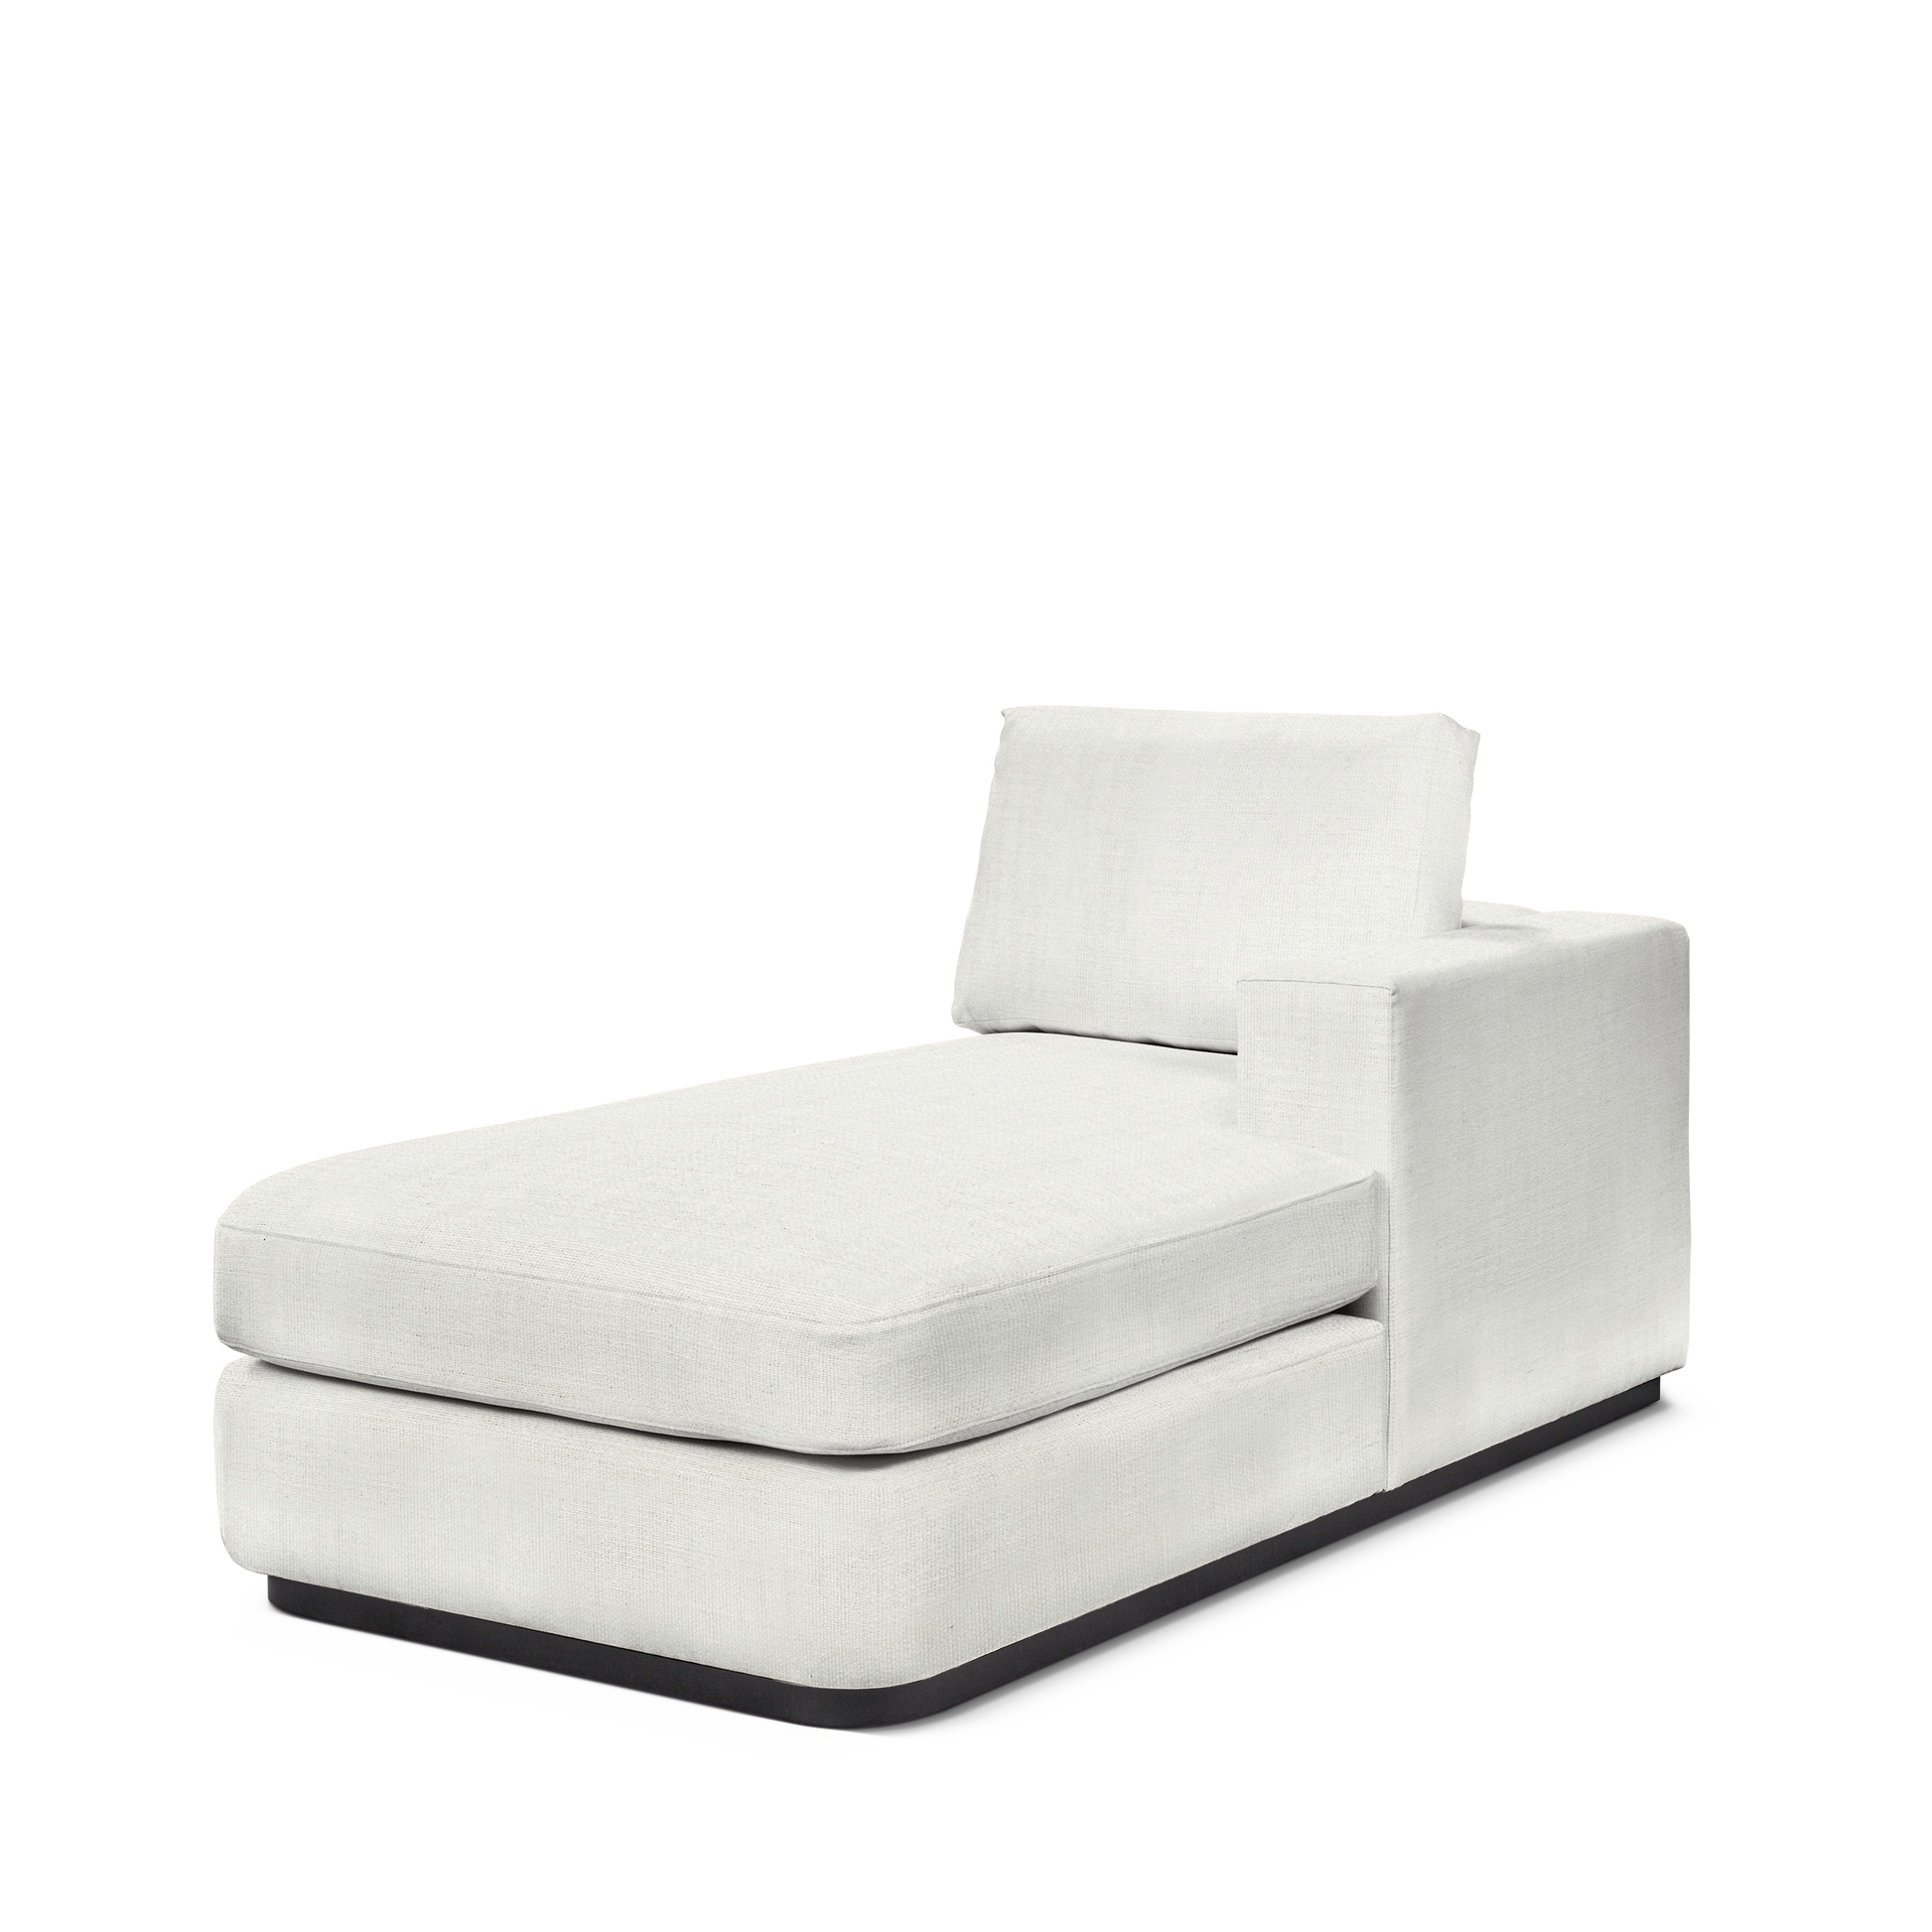 ATLAS 90 Lounge Bed arm rest right with rocco white textile